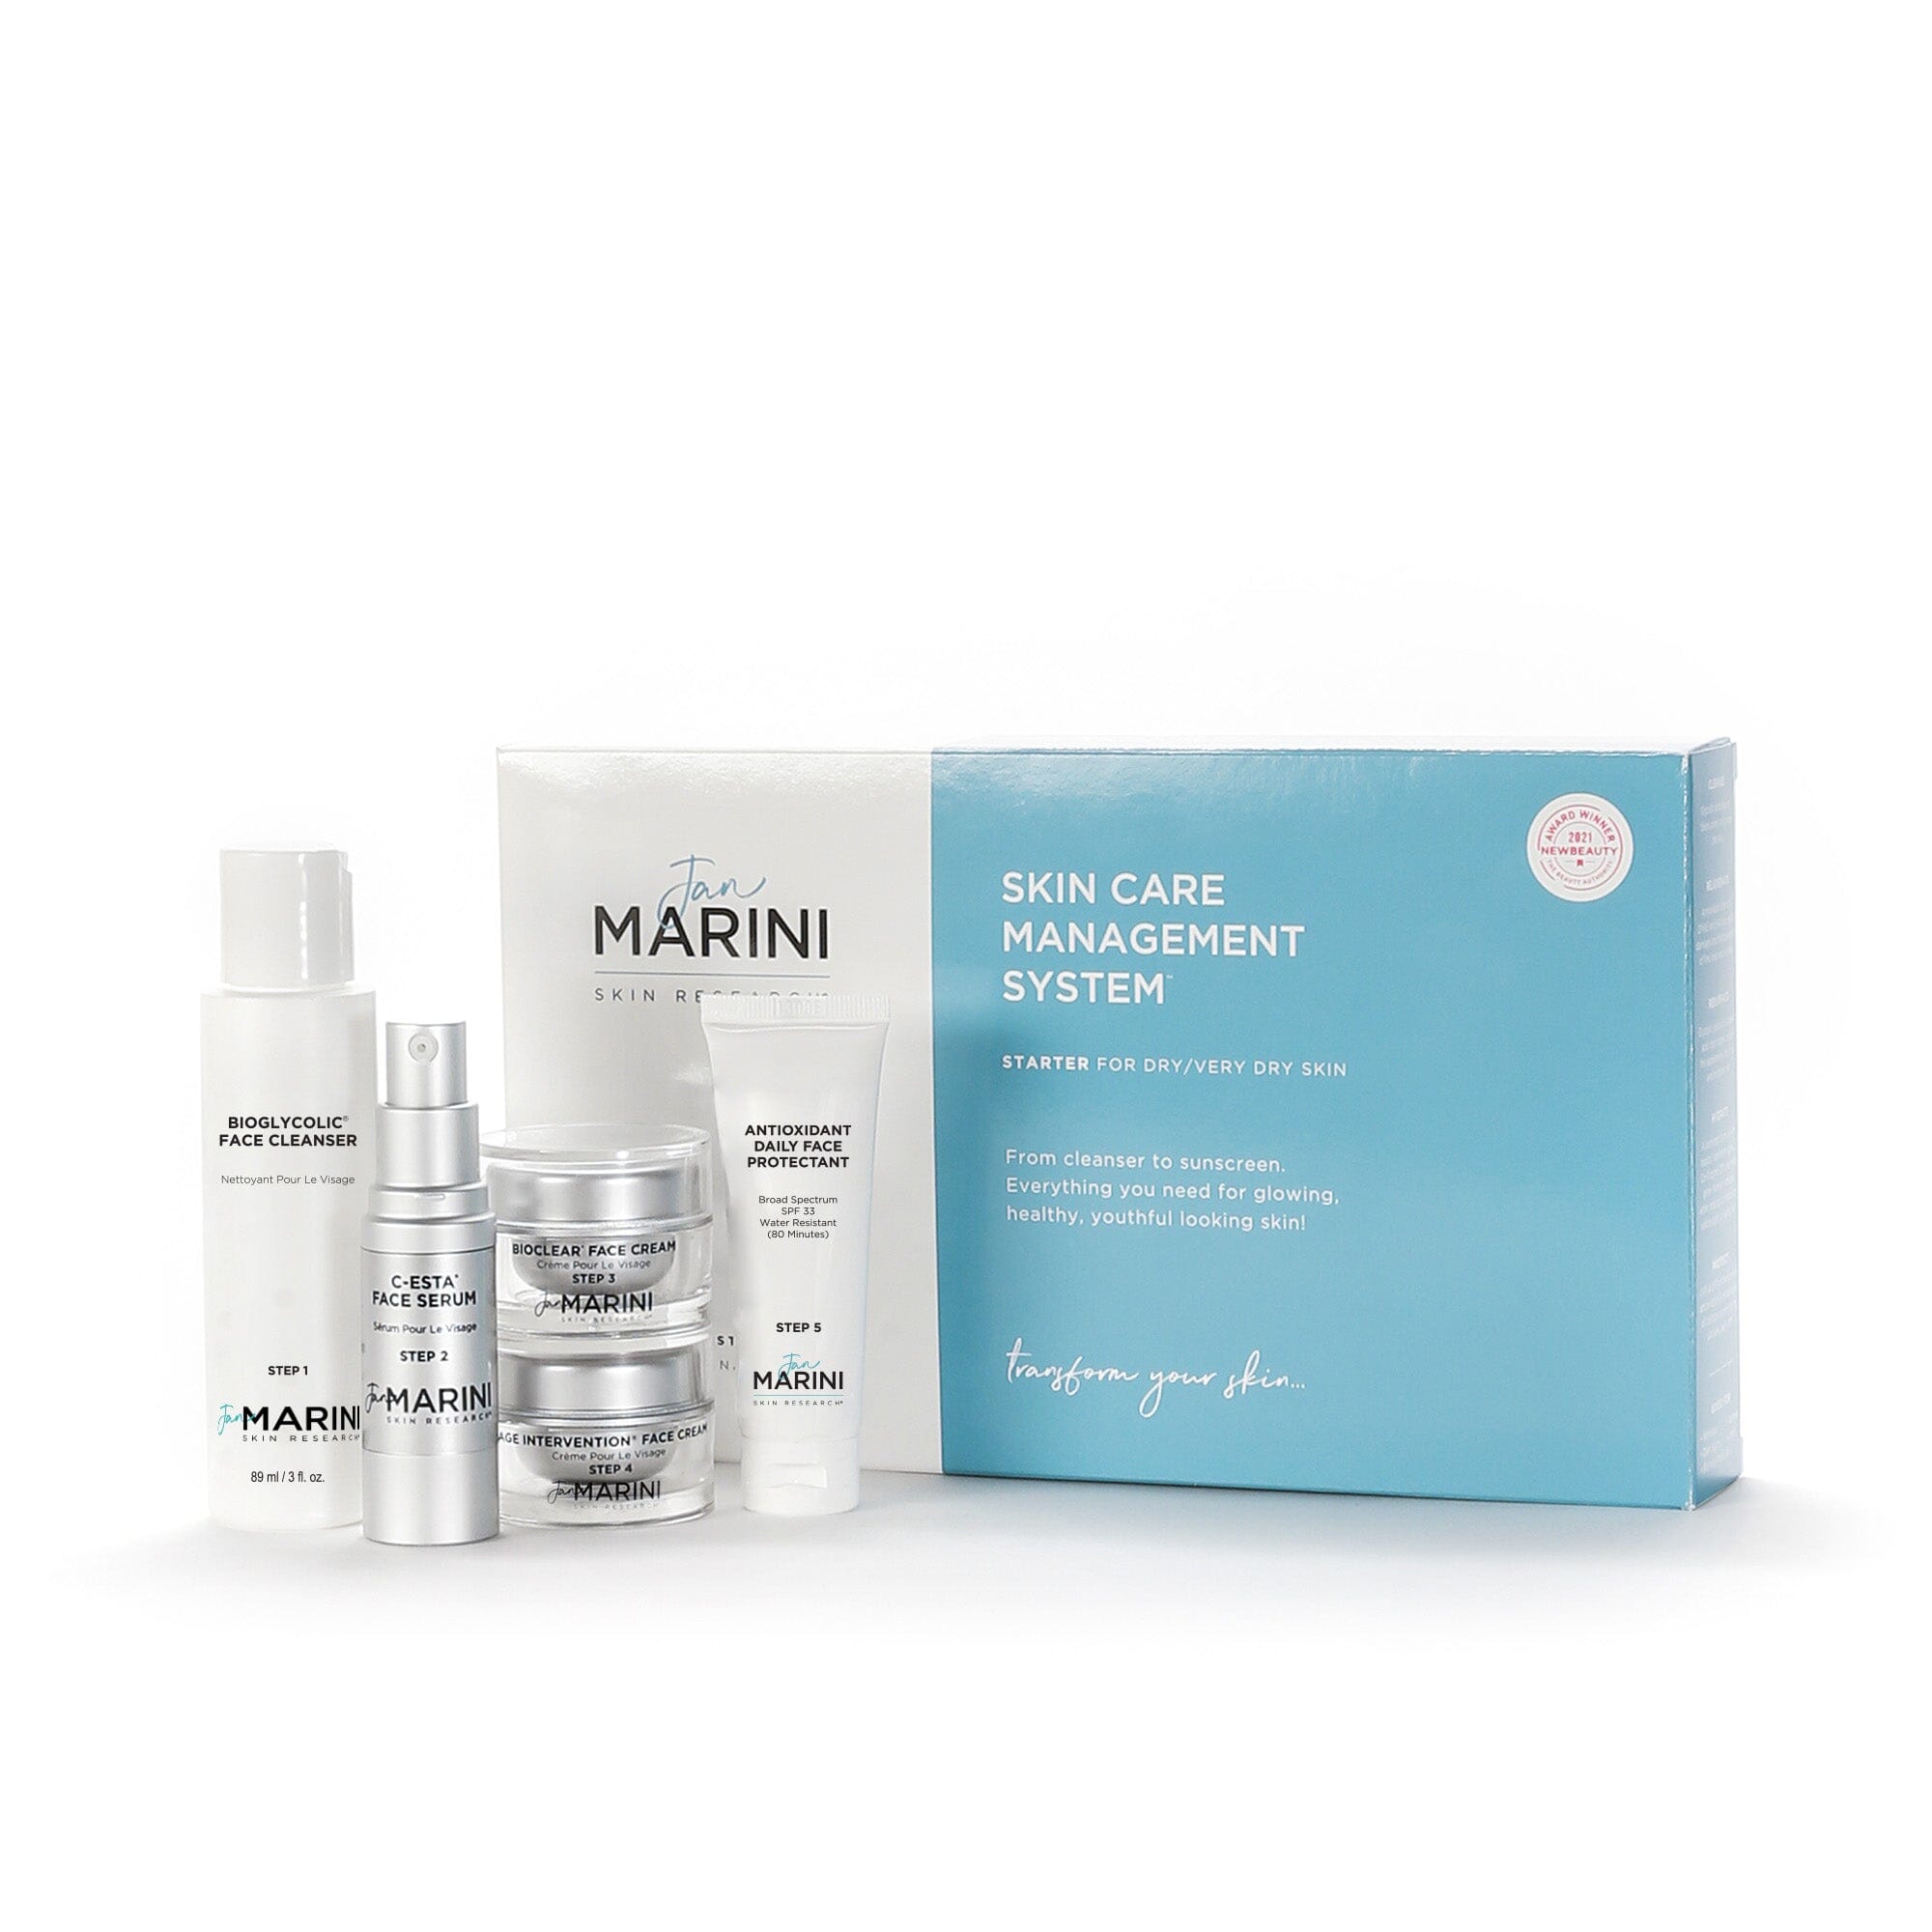 Jan Marini Starter Skin Care Management System-Dry/Very Dry Skin with Antioxidant Daily Face Protectant SPF 33 Anti-Aging Skin Care Kits Jan Marini Shop at Exclusive Beauty Club